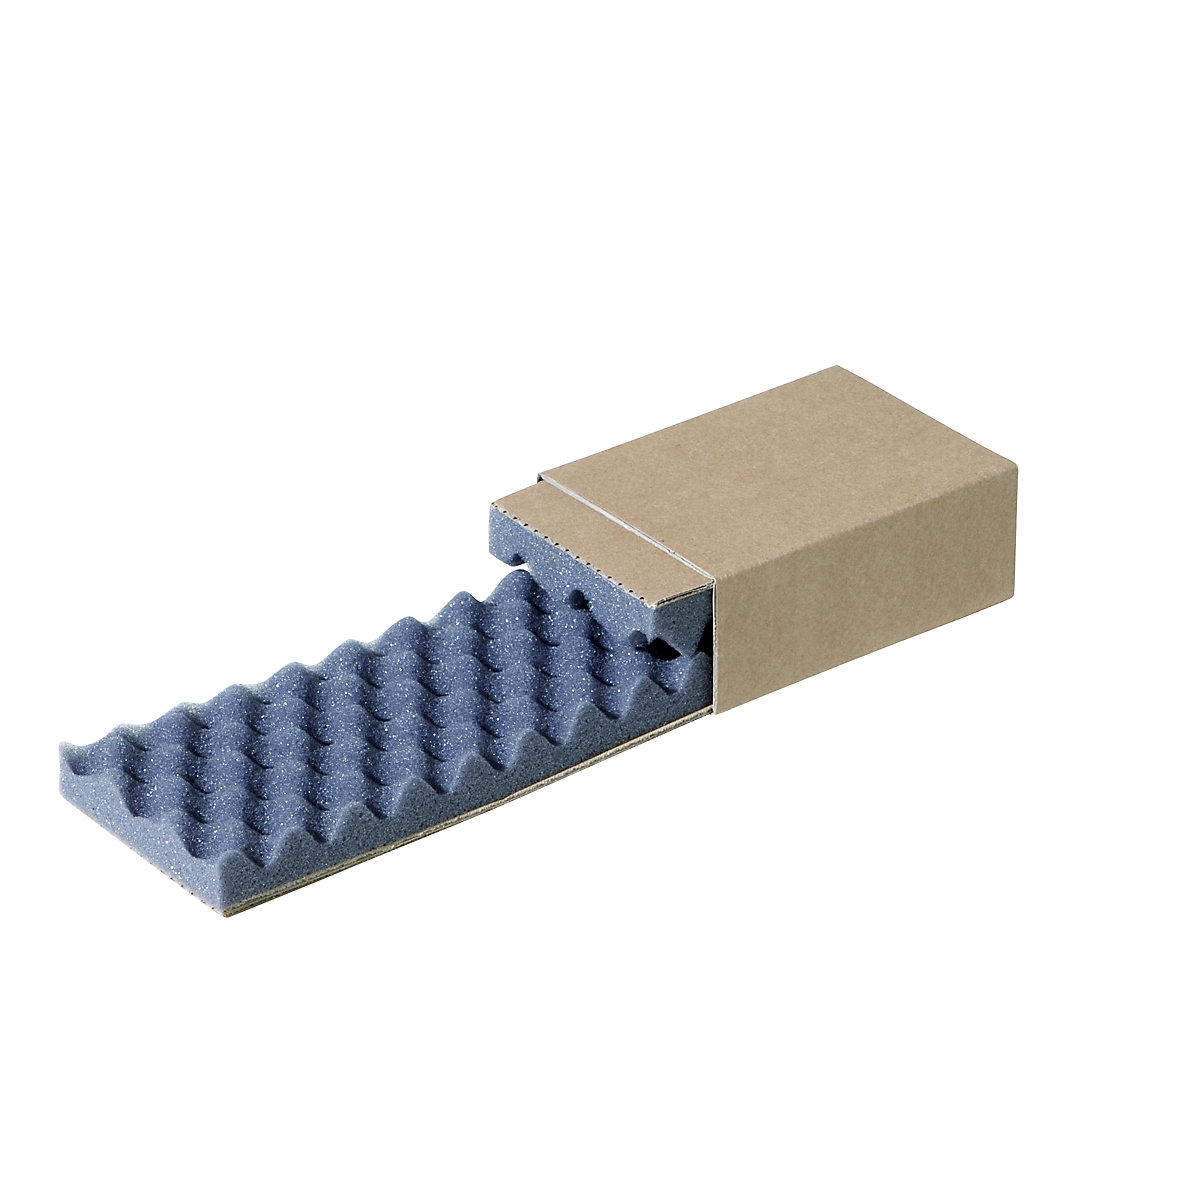 Slide boxes, internal part FEFCO 0907, external part FEFCO 0503, padded, internal dimensions 150 x 100 x 50 mm, pack of 50-1